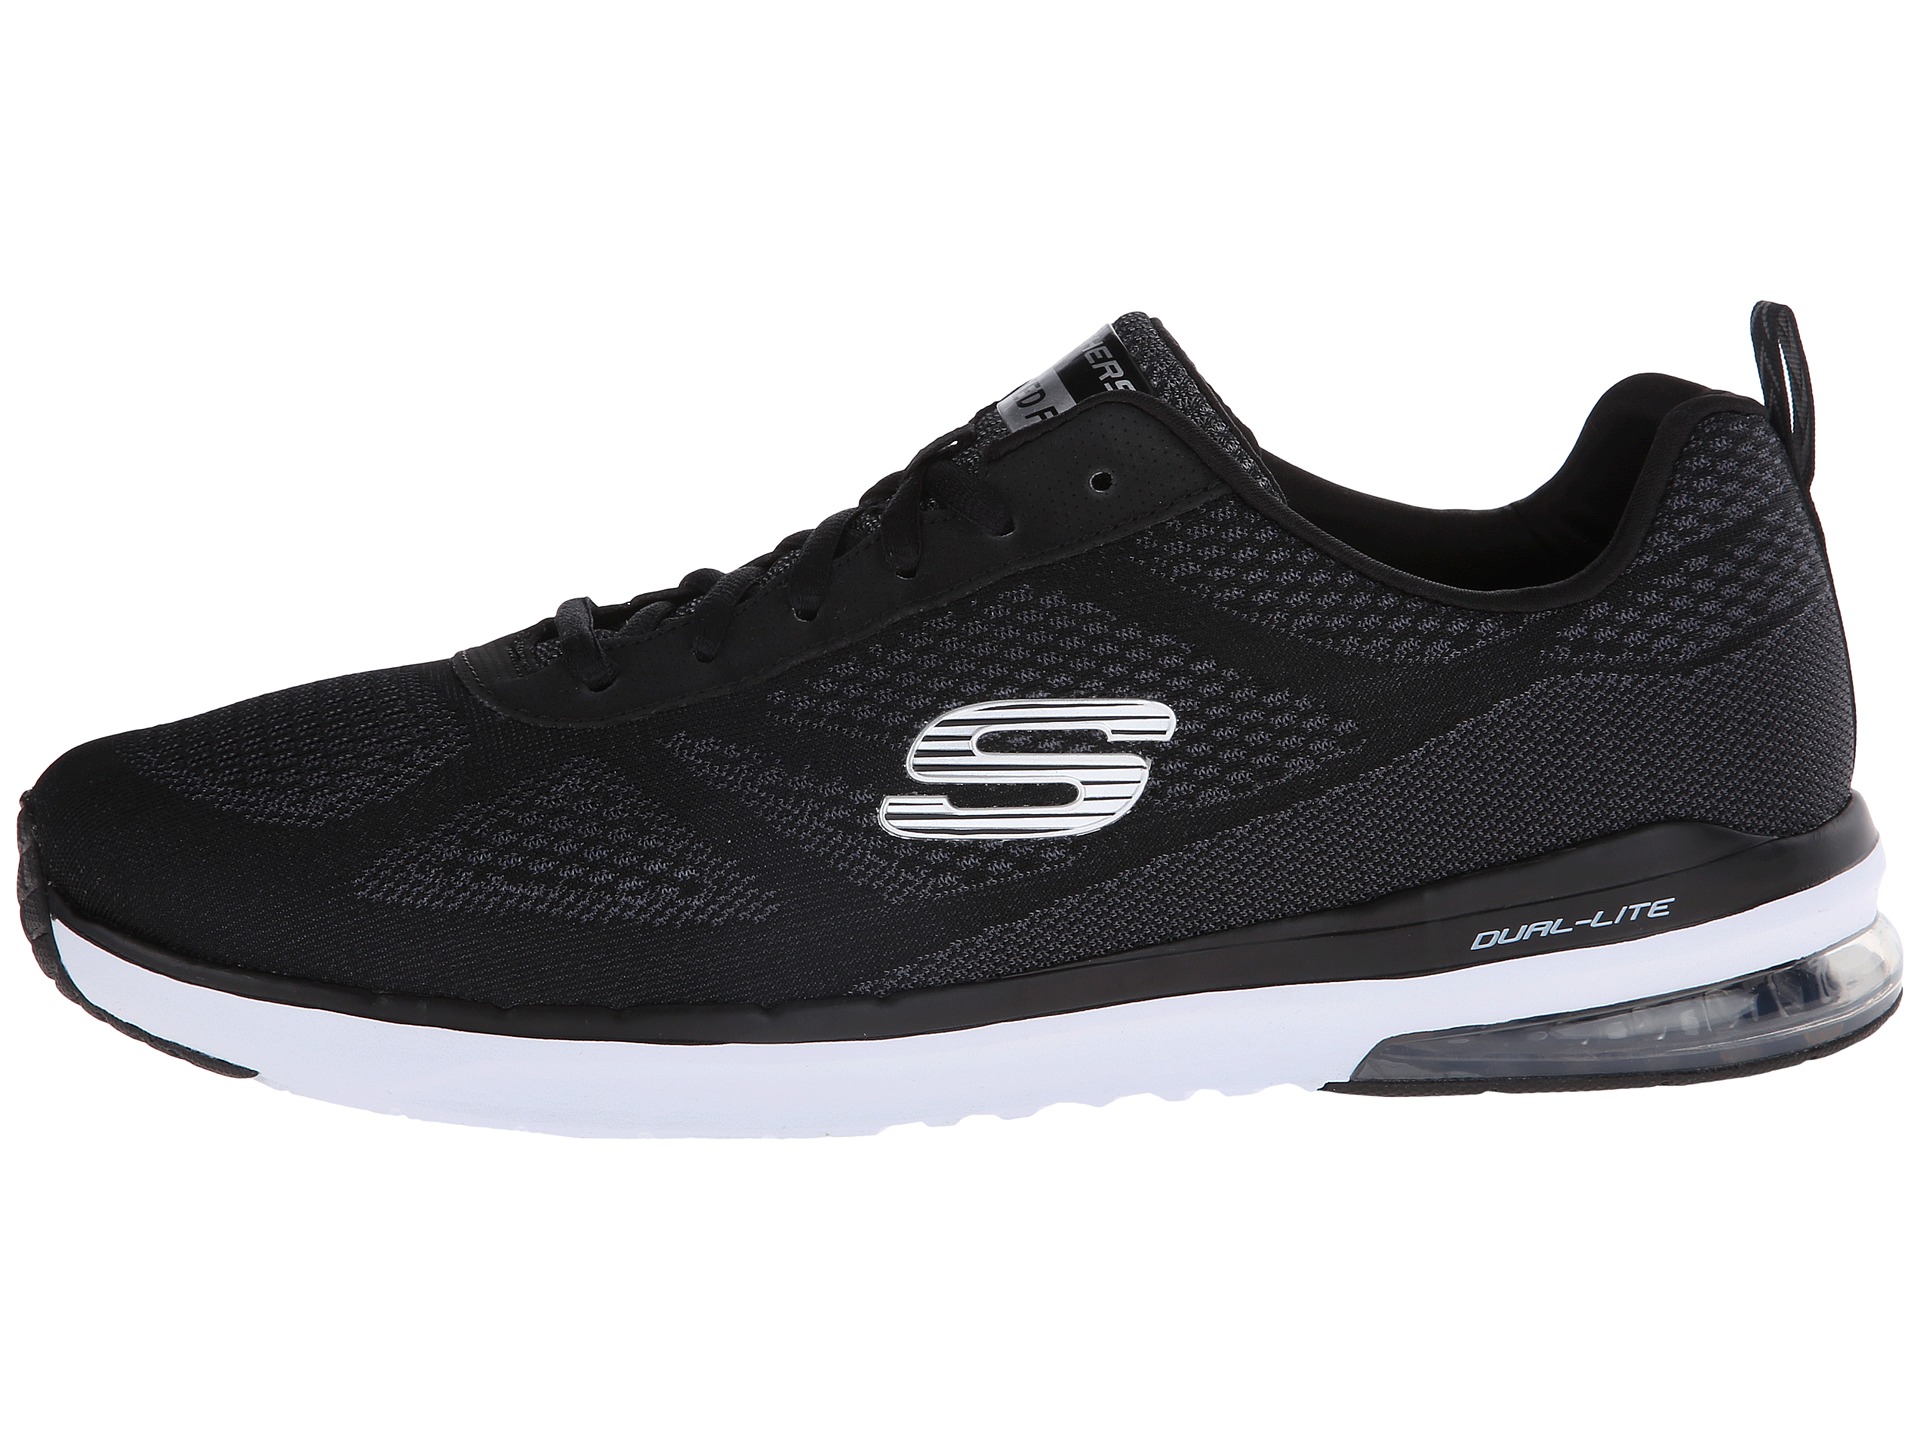 SKECHERS Sketch Air Infinity - Zappos.com Free Shipping BOTH Ways